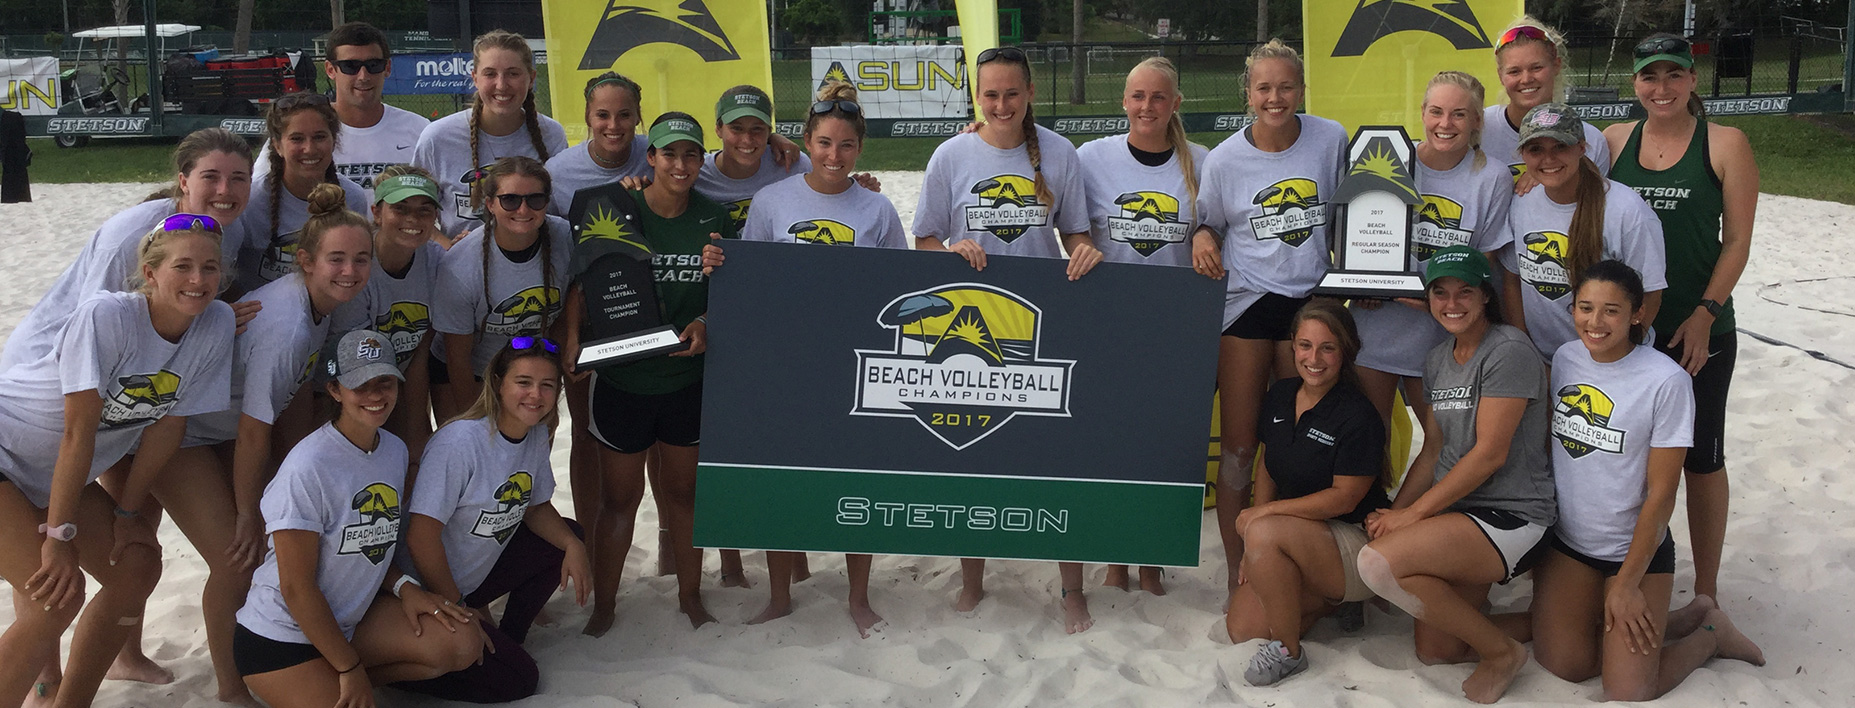 Hatters Capture ASUN Beach Volleyball Championship Stetson Today